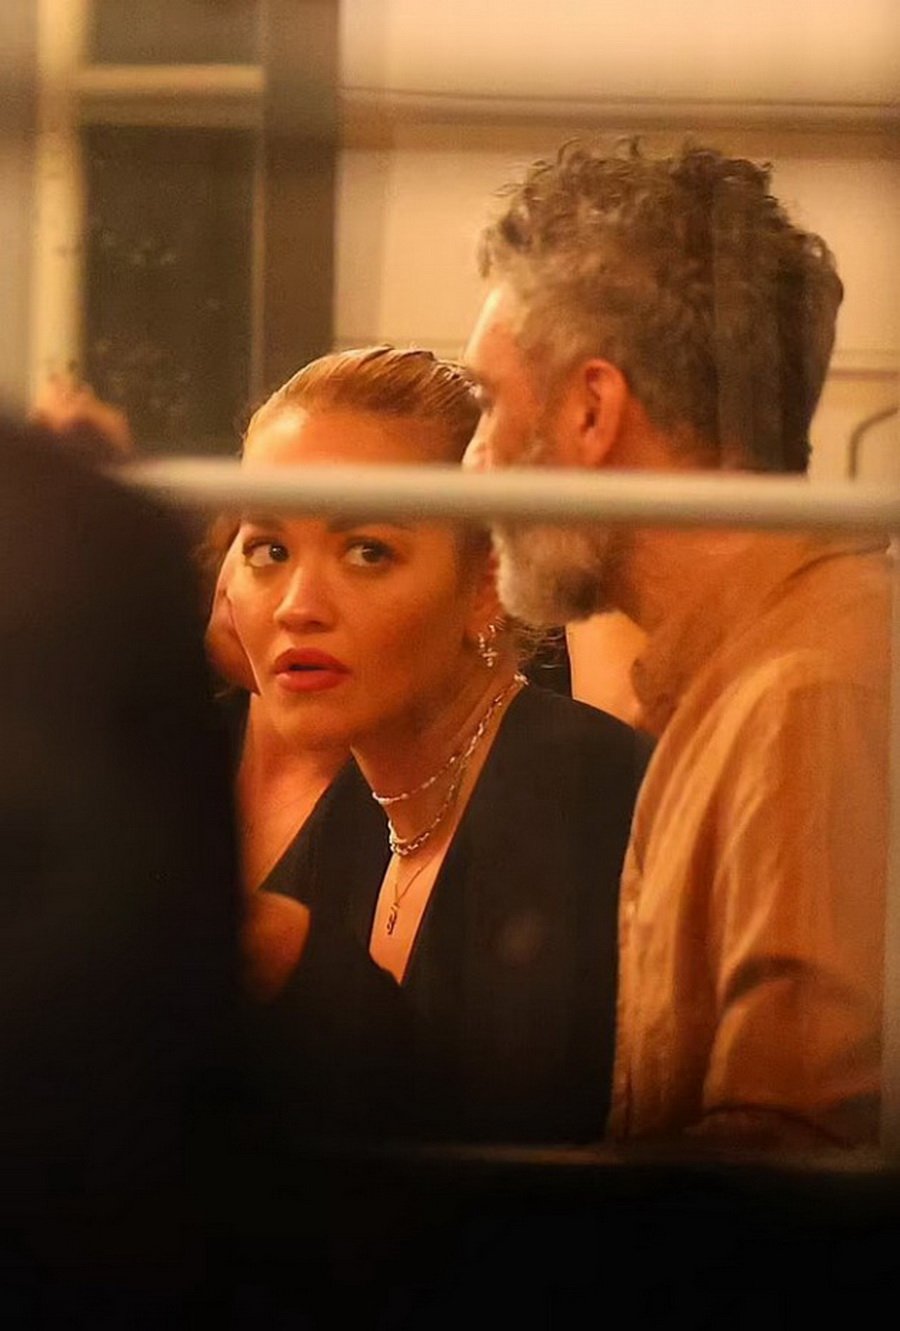 Rita Ora and Taika Waititi were photographed at a dinner in Sydney after the scandal